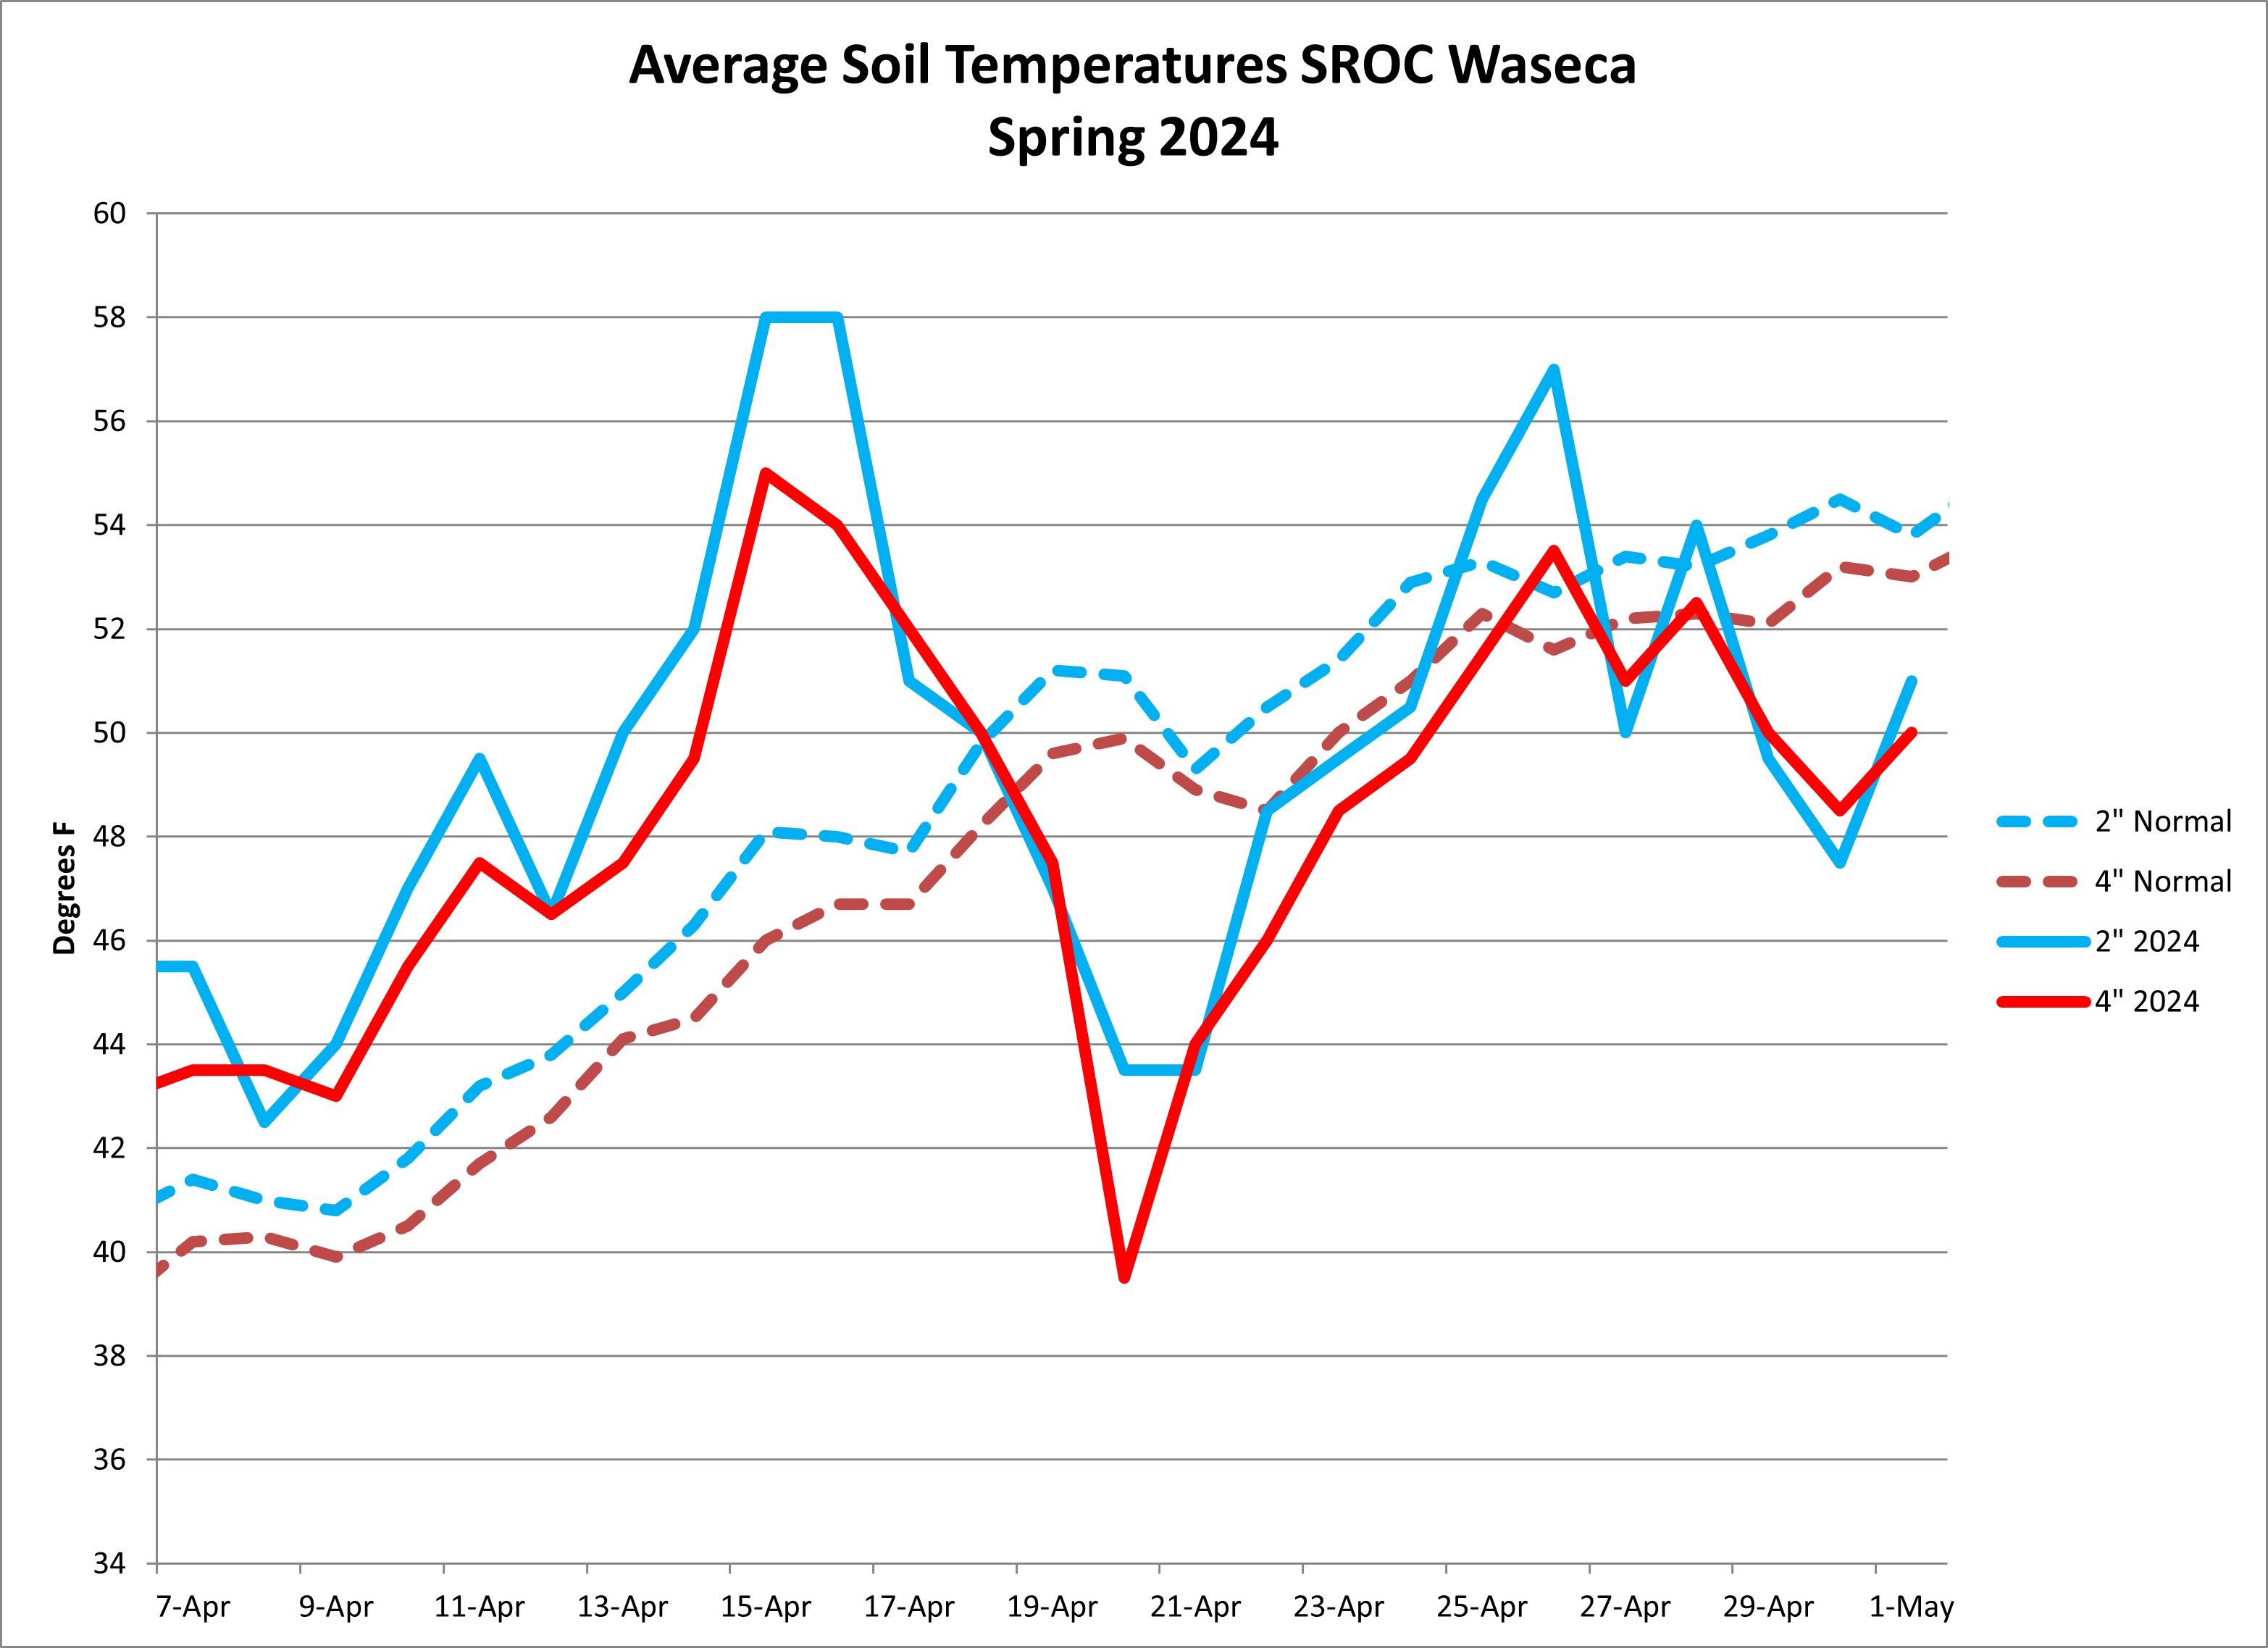 A graph showing avg soil temperatures in Waseca, MN in spring 2024.